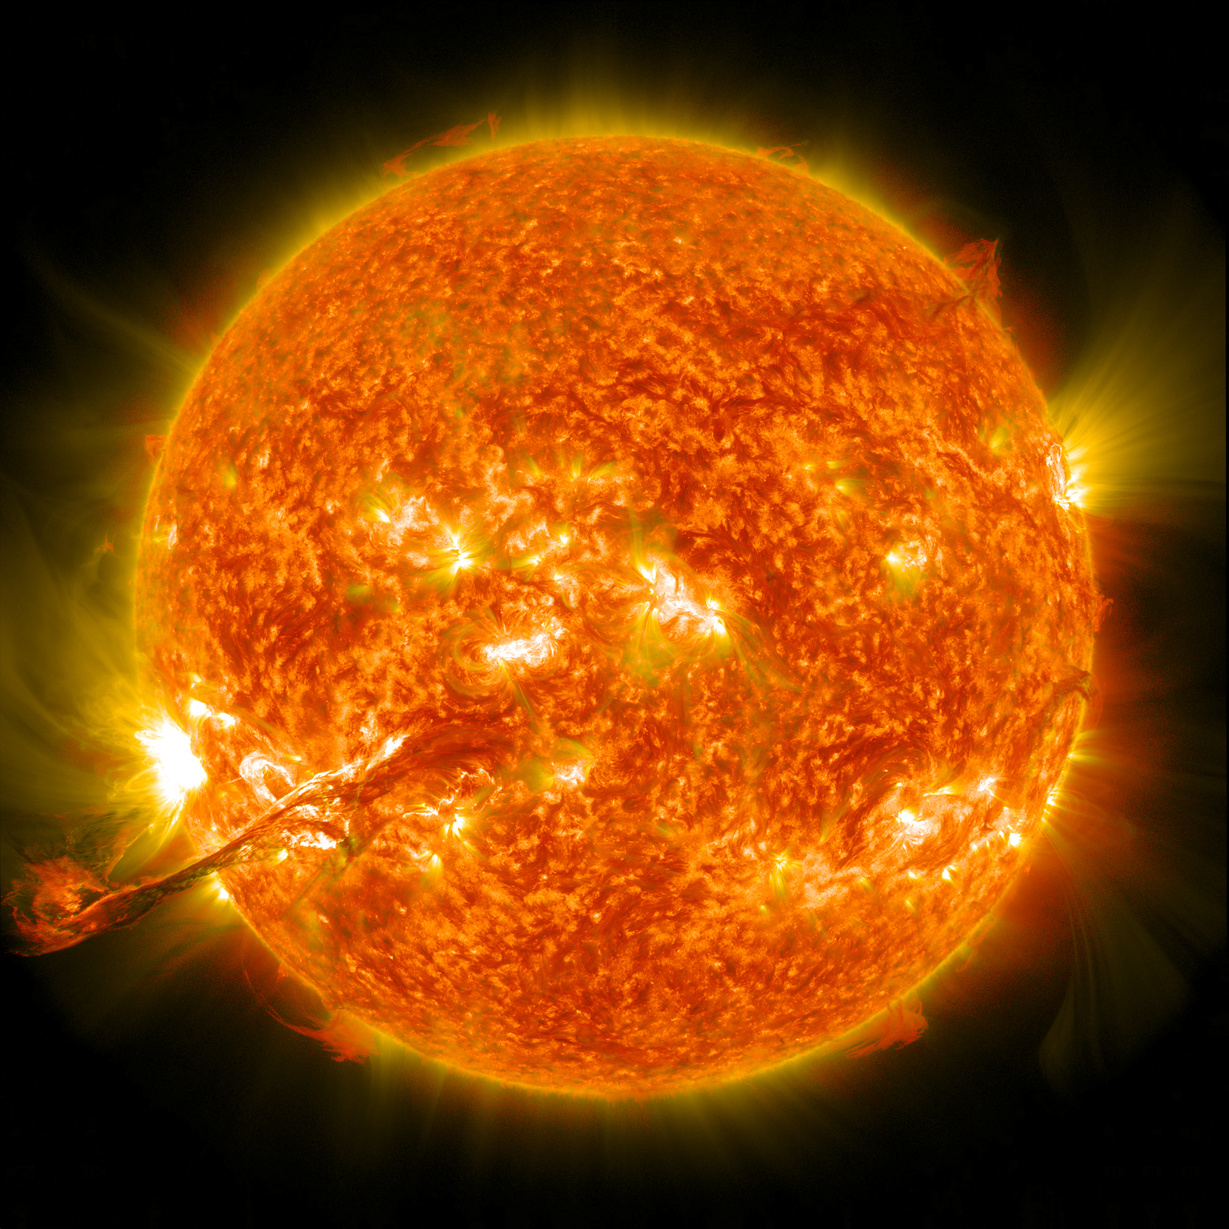 Coronal Mass Ejection Erupting on the Sun